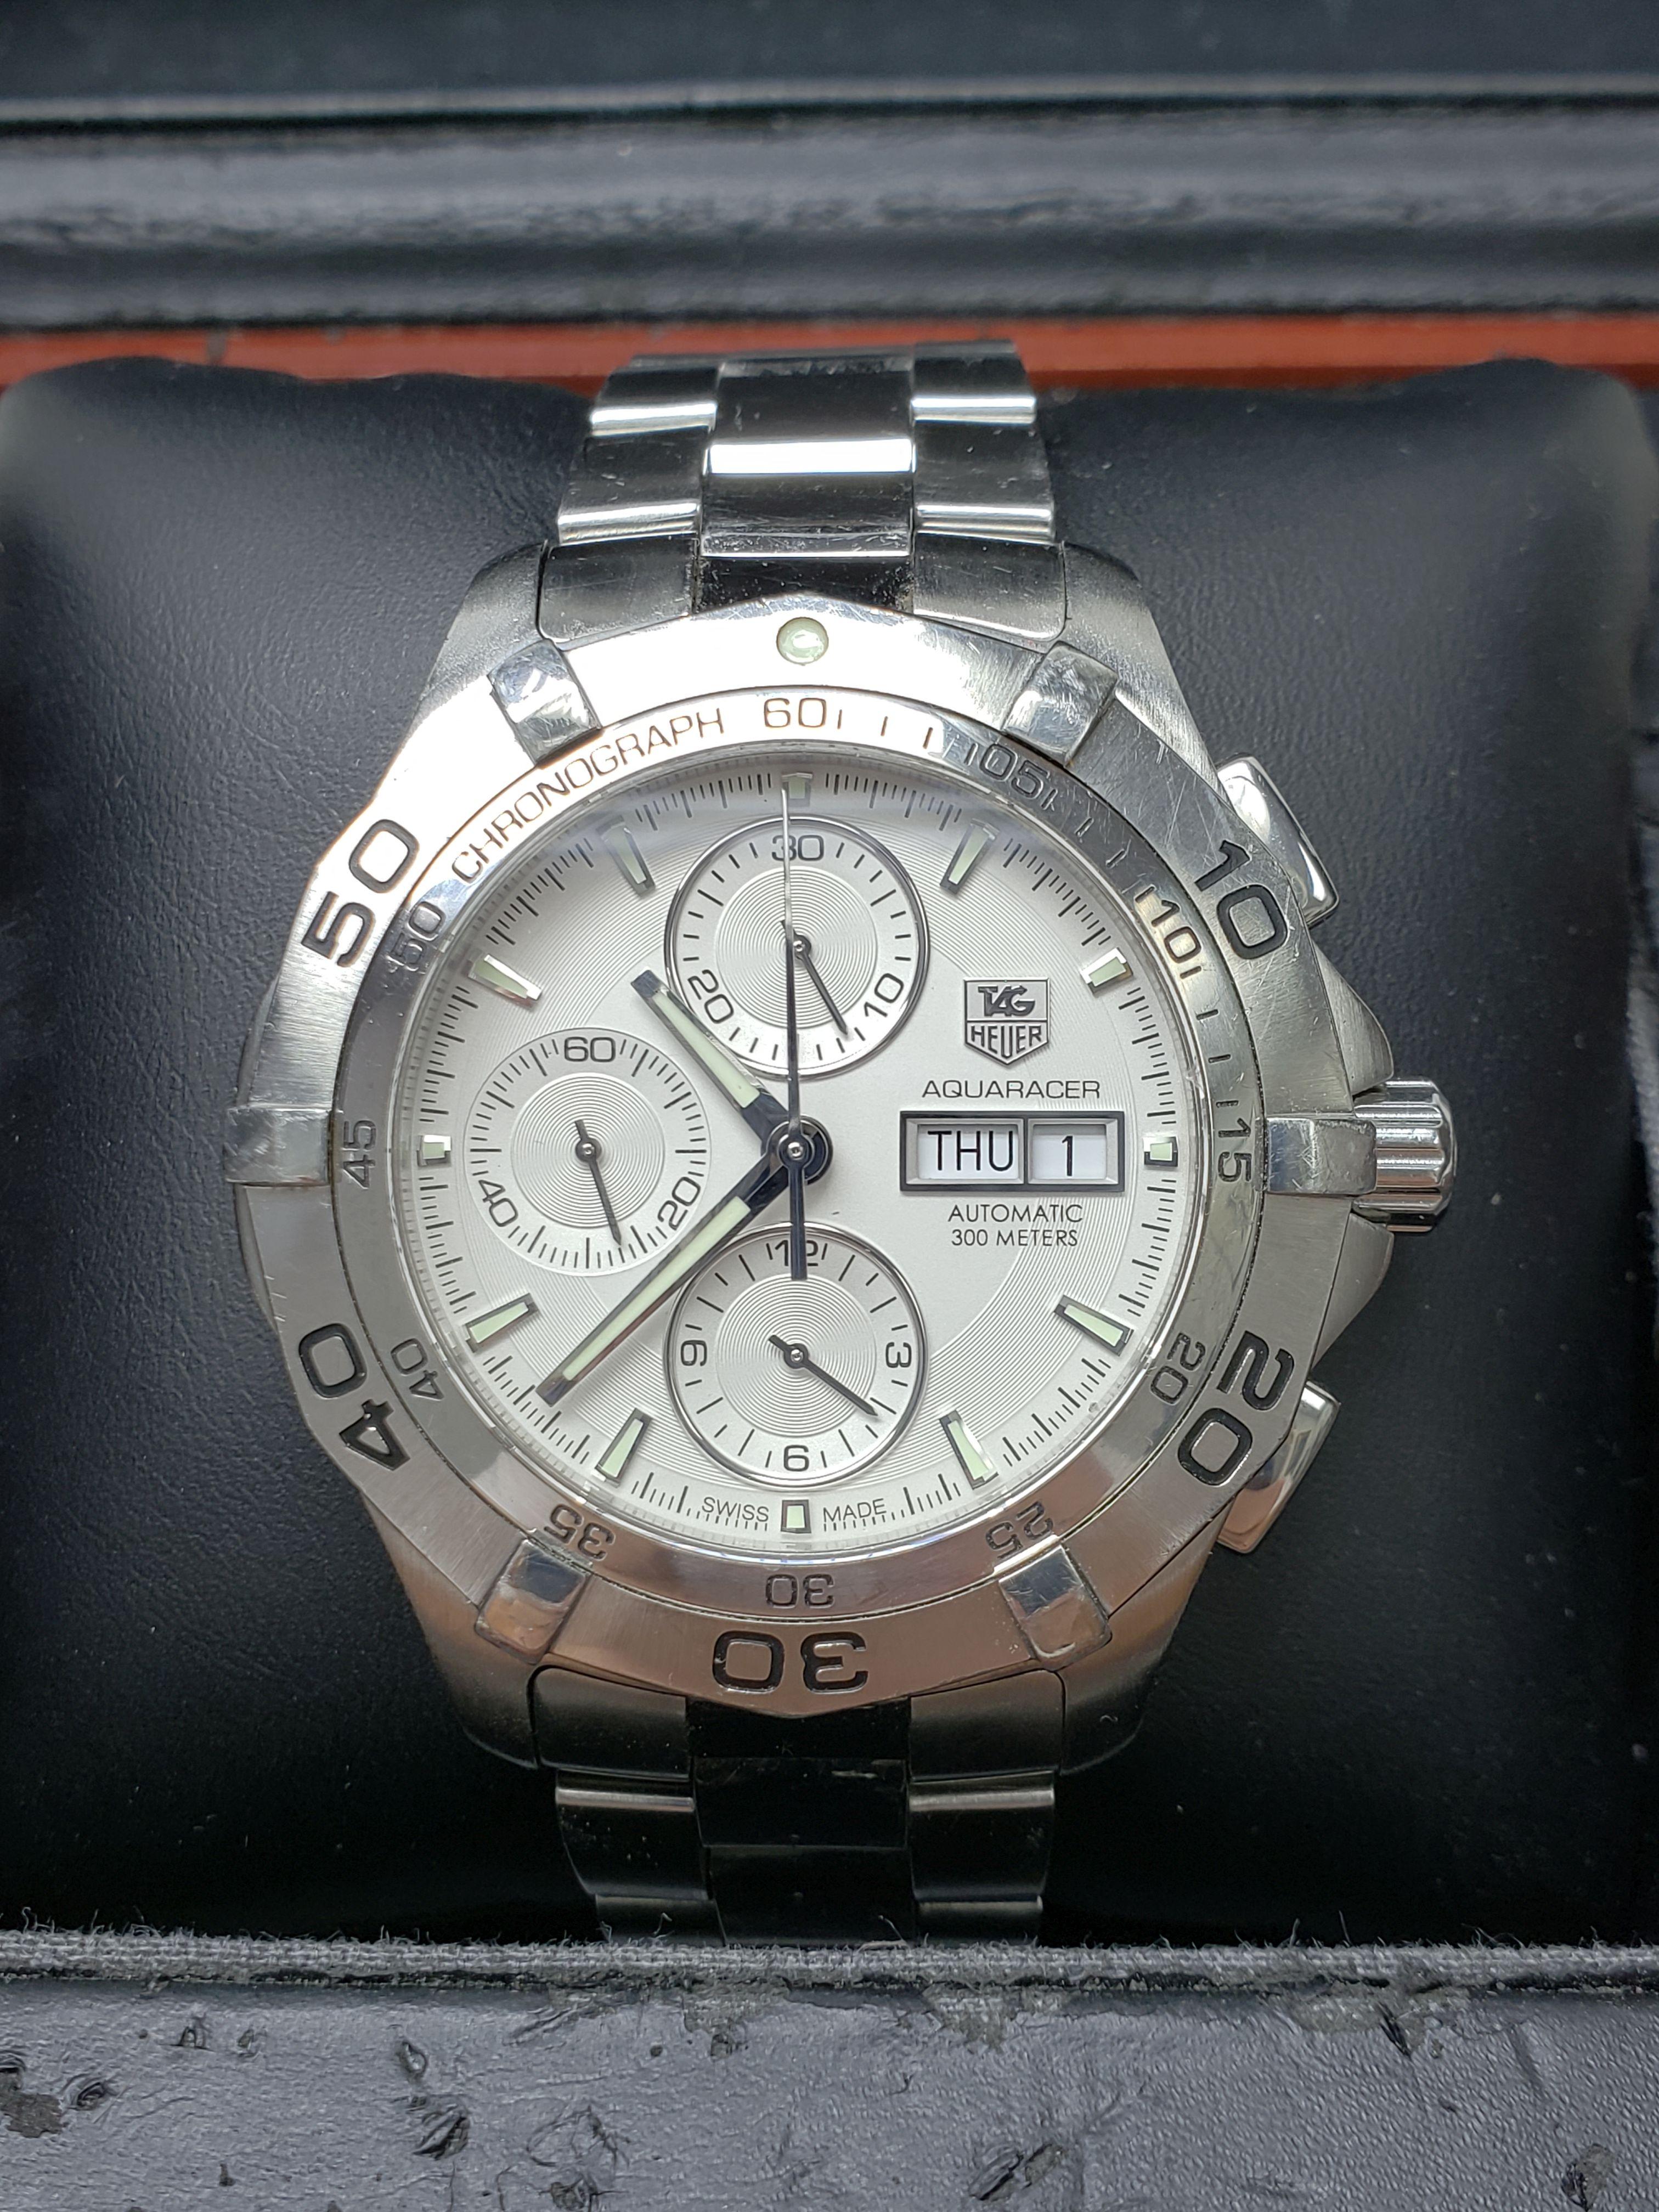 Authentic Mens Tag Heuer CAF2011 Automatic Chronograph White Dial Watch with Box